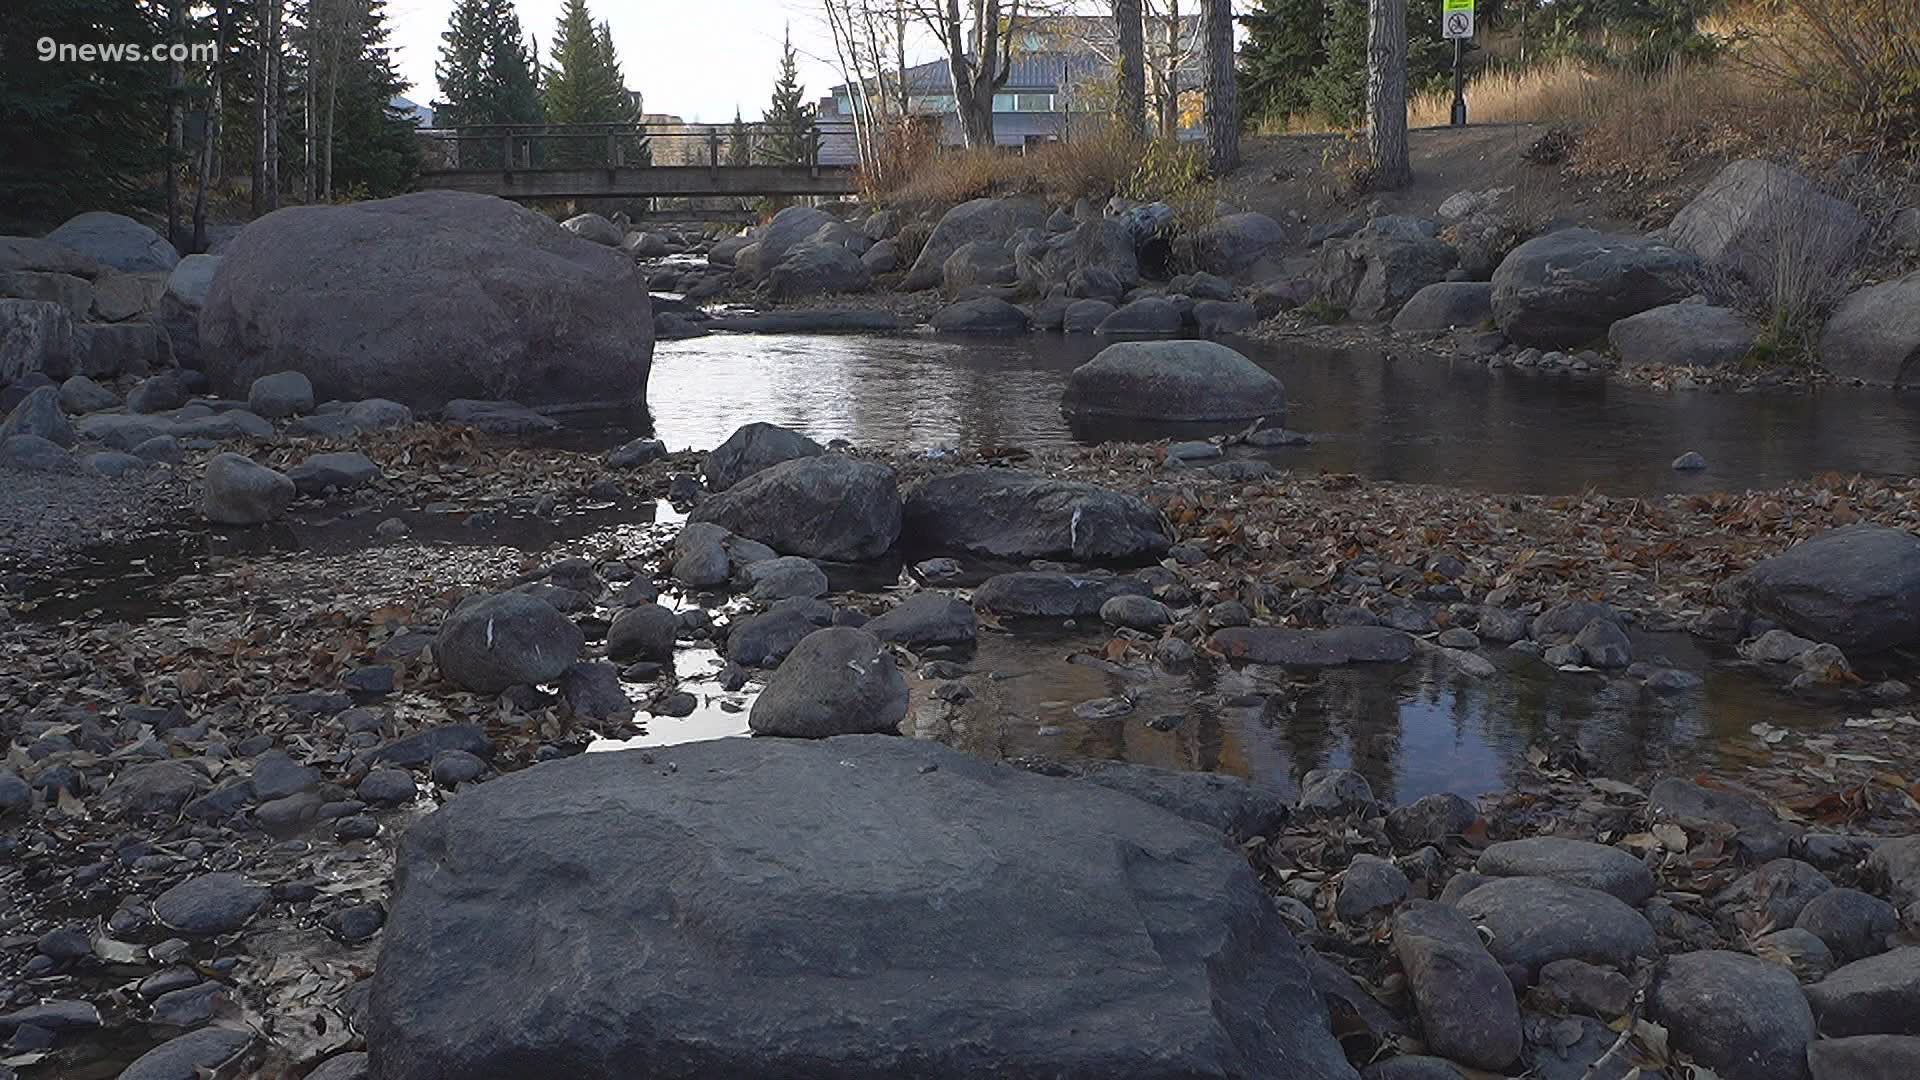 Recent snow helps a little, but the impact of the statewide drought is apparent at the Blue River Basin, where some rivers are lower than anyone has seen in years.